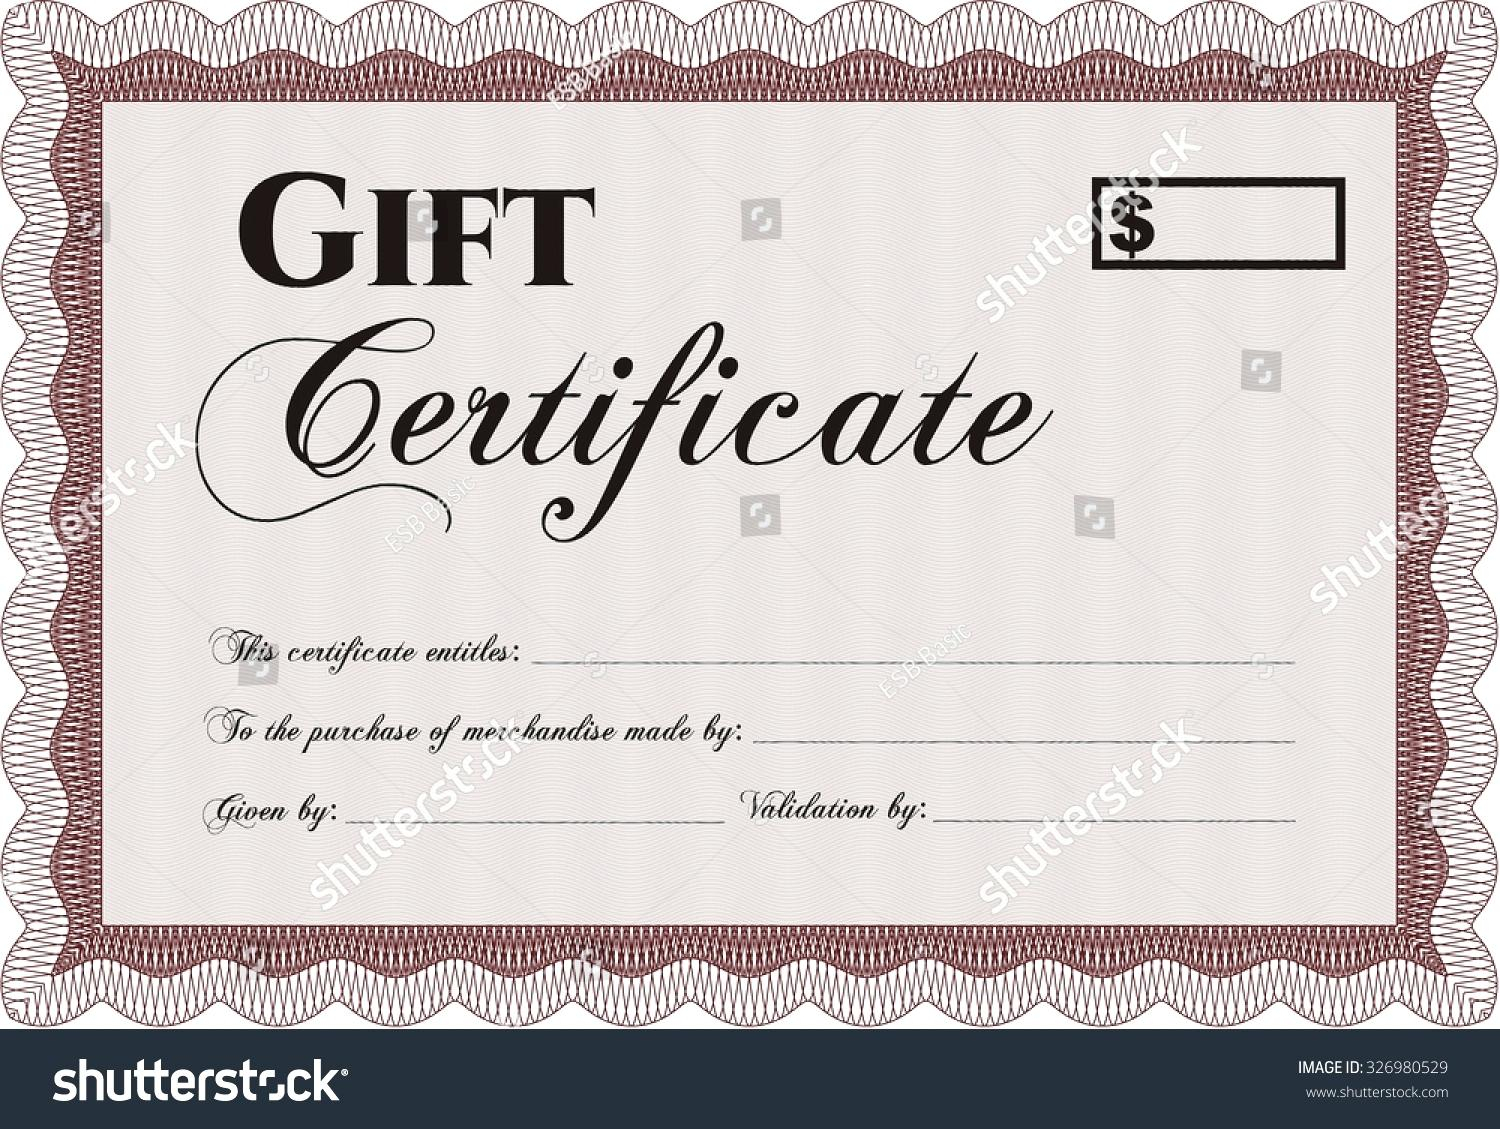 Best Ideas For This Certificate Entitles The Bearer Template Of Your intended for This Certificate Entitles The Bearer Template